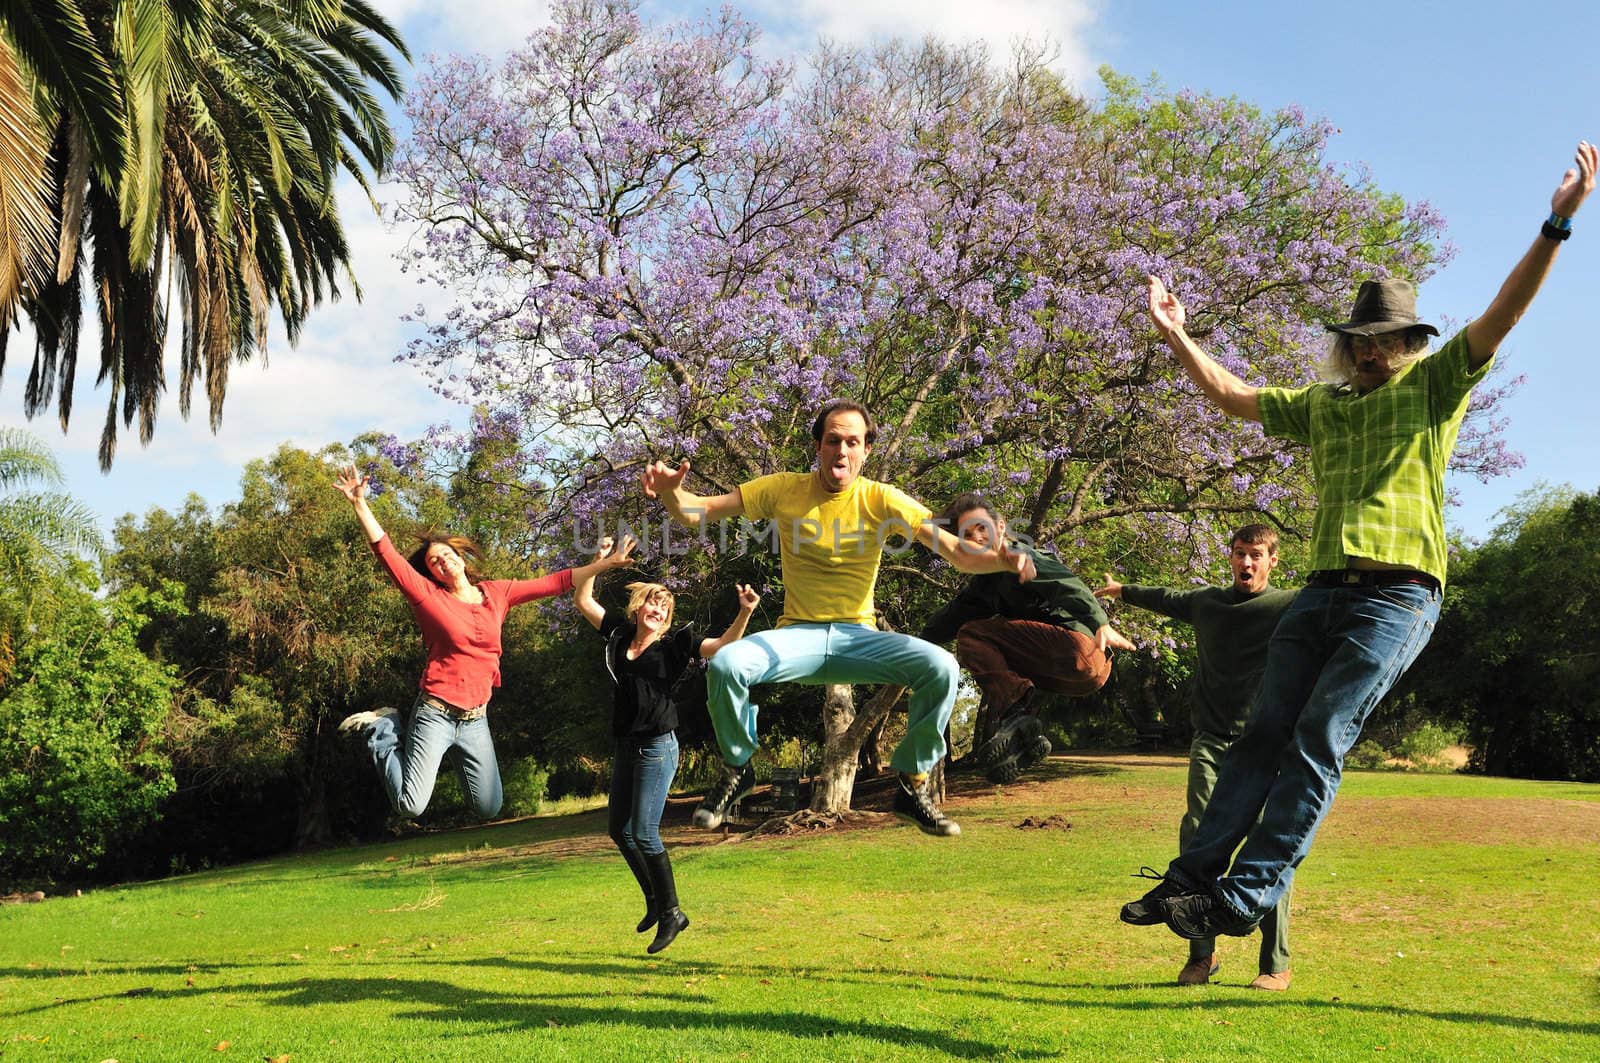 Group of six silly adults jump into the air with joyful enthusiasm